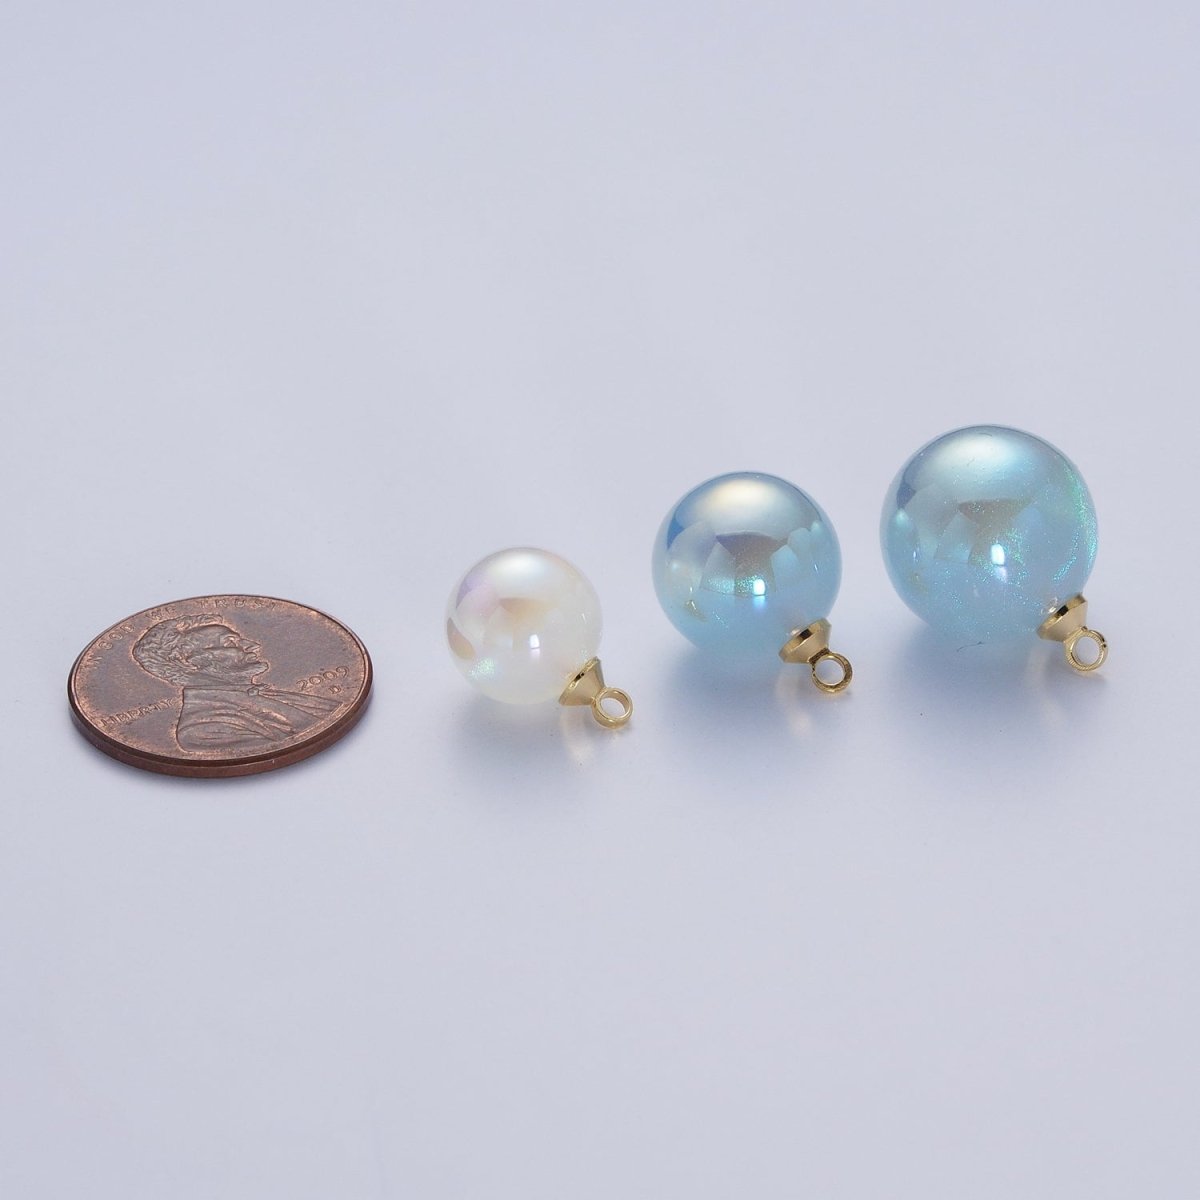 Iridescent Sparkly Blue & White Pearl Round Charm Pendant For Jewelry Making P-1558~P-1562 - DLUXCA